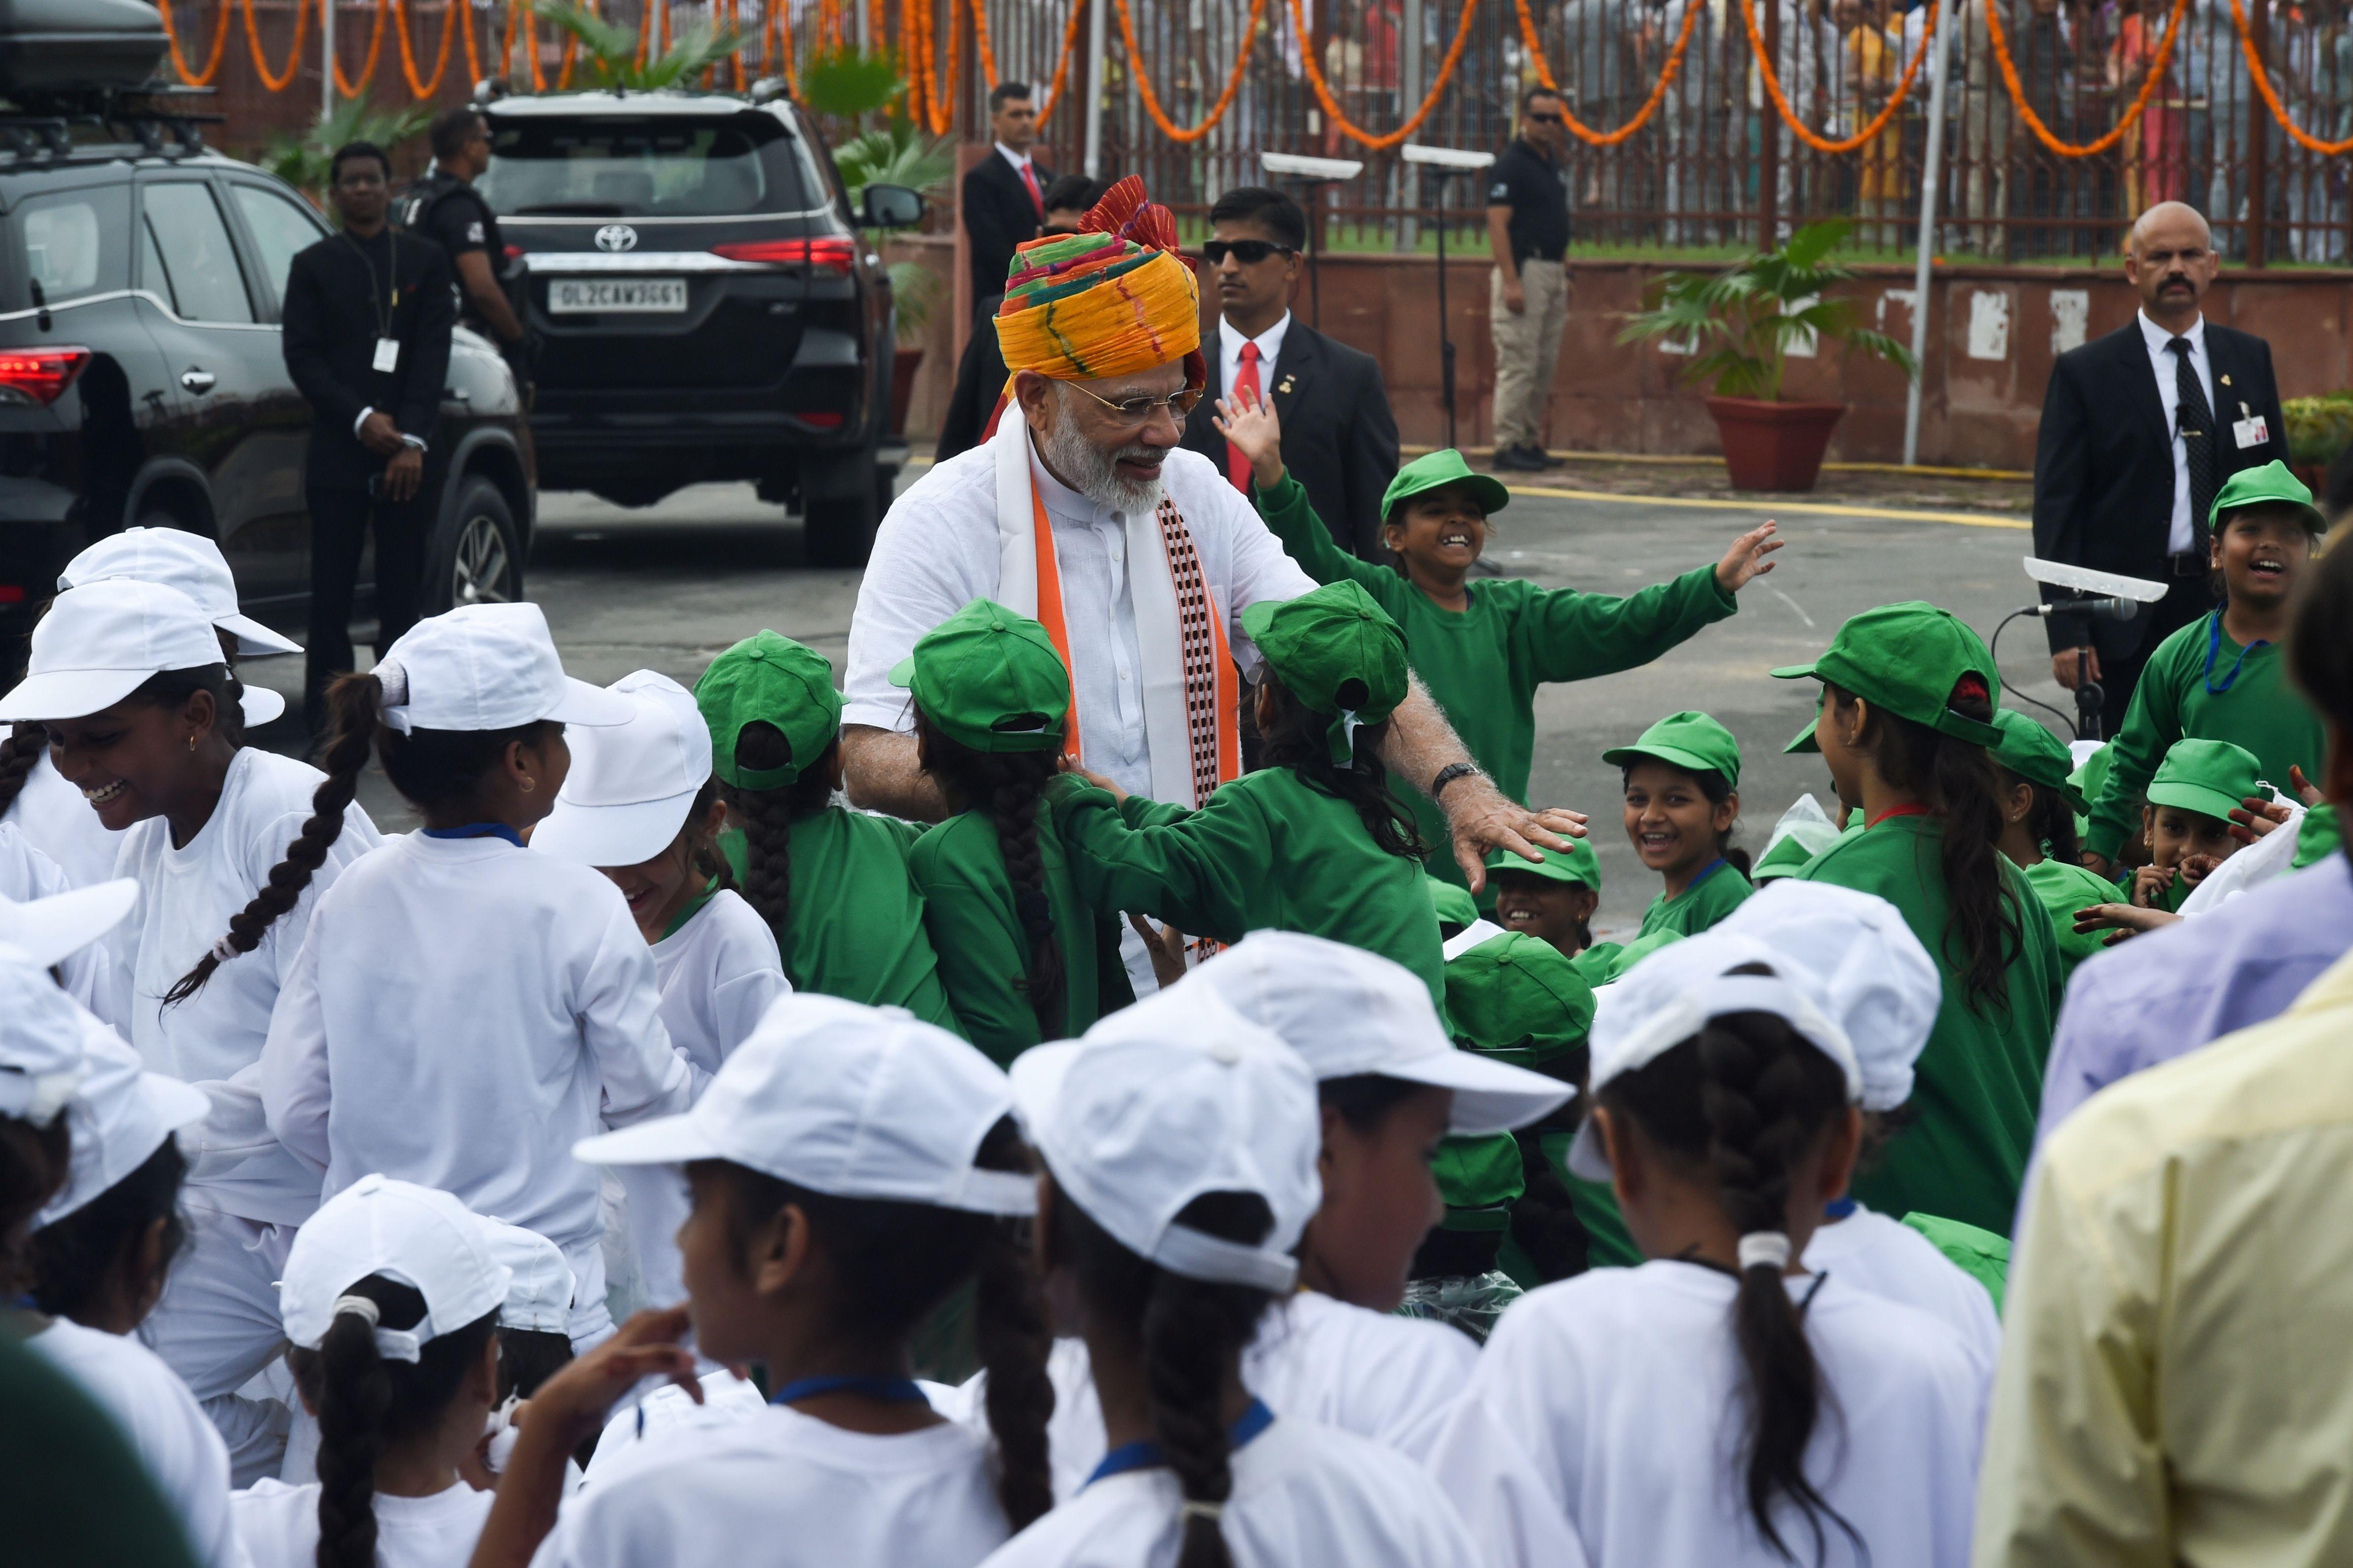 India's Prime Minister Narendra Modi greets children during a ceremony to celebrate country's 73rd Independence Day at the Red Fort in New Delhi on August 15, 2019. Pic/AFP